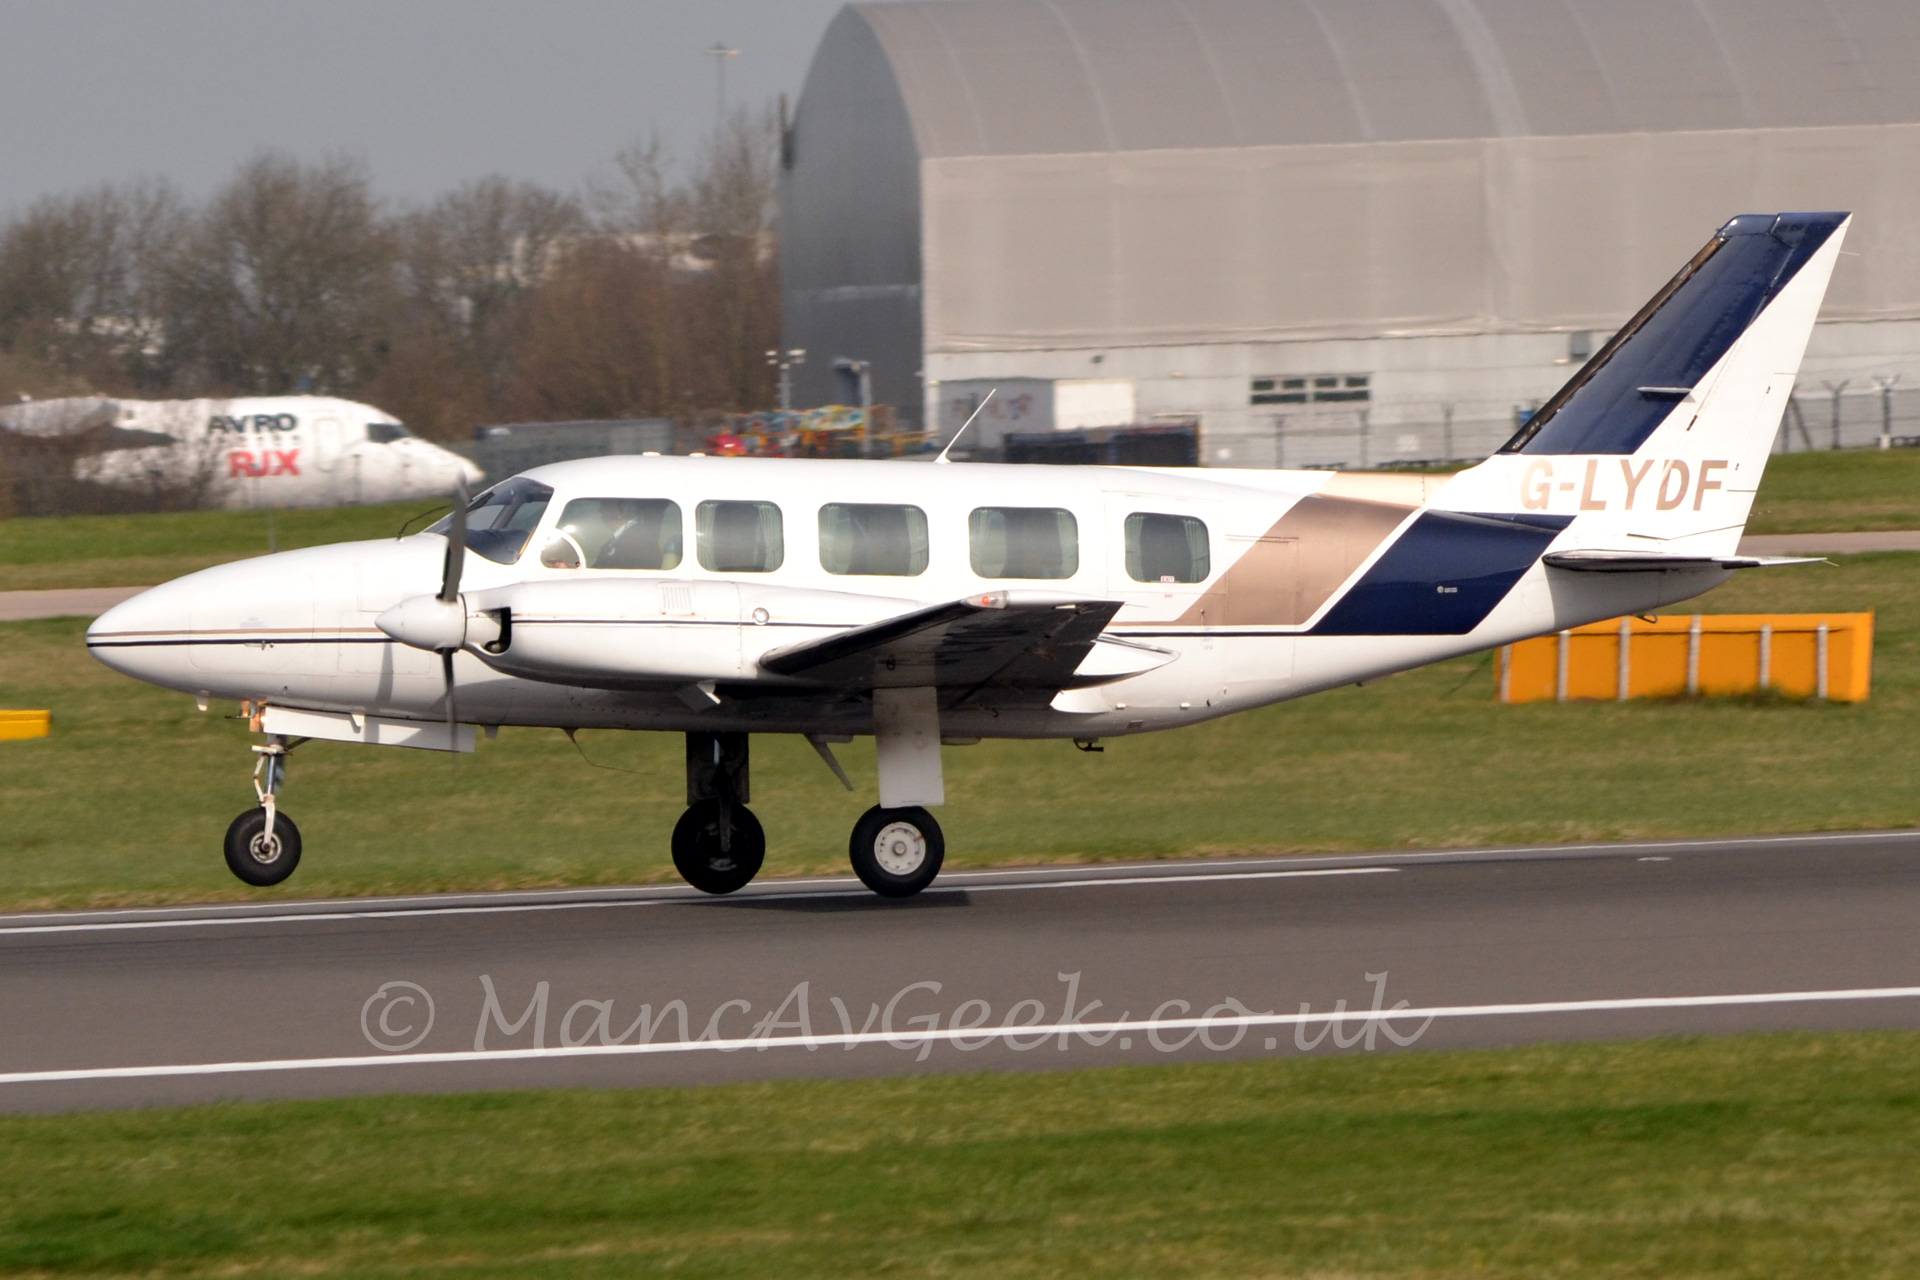 Side view of a twin propellor engined business aircraft moving from right to left, with the nose lifted slightly off the ground as it rotates off the runway. The plane is mostly white, with a thin blue and gold stripe running along the body from the nose, widening behind the cabin windows, before sweeping up to occupy most of the tail. The registration "G-LYDF" is on the tail in large golden letters. In the background is a large grey-brown hanger, behind which is a white jet airliner with "Avro RJX" titles on the forward fuselage.